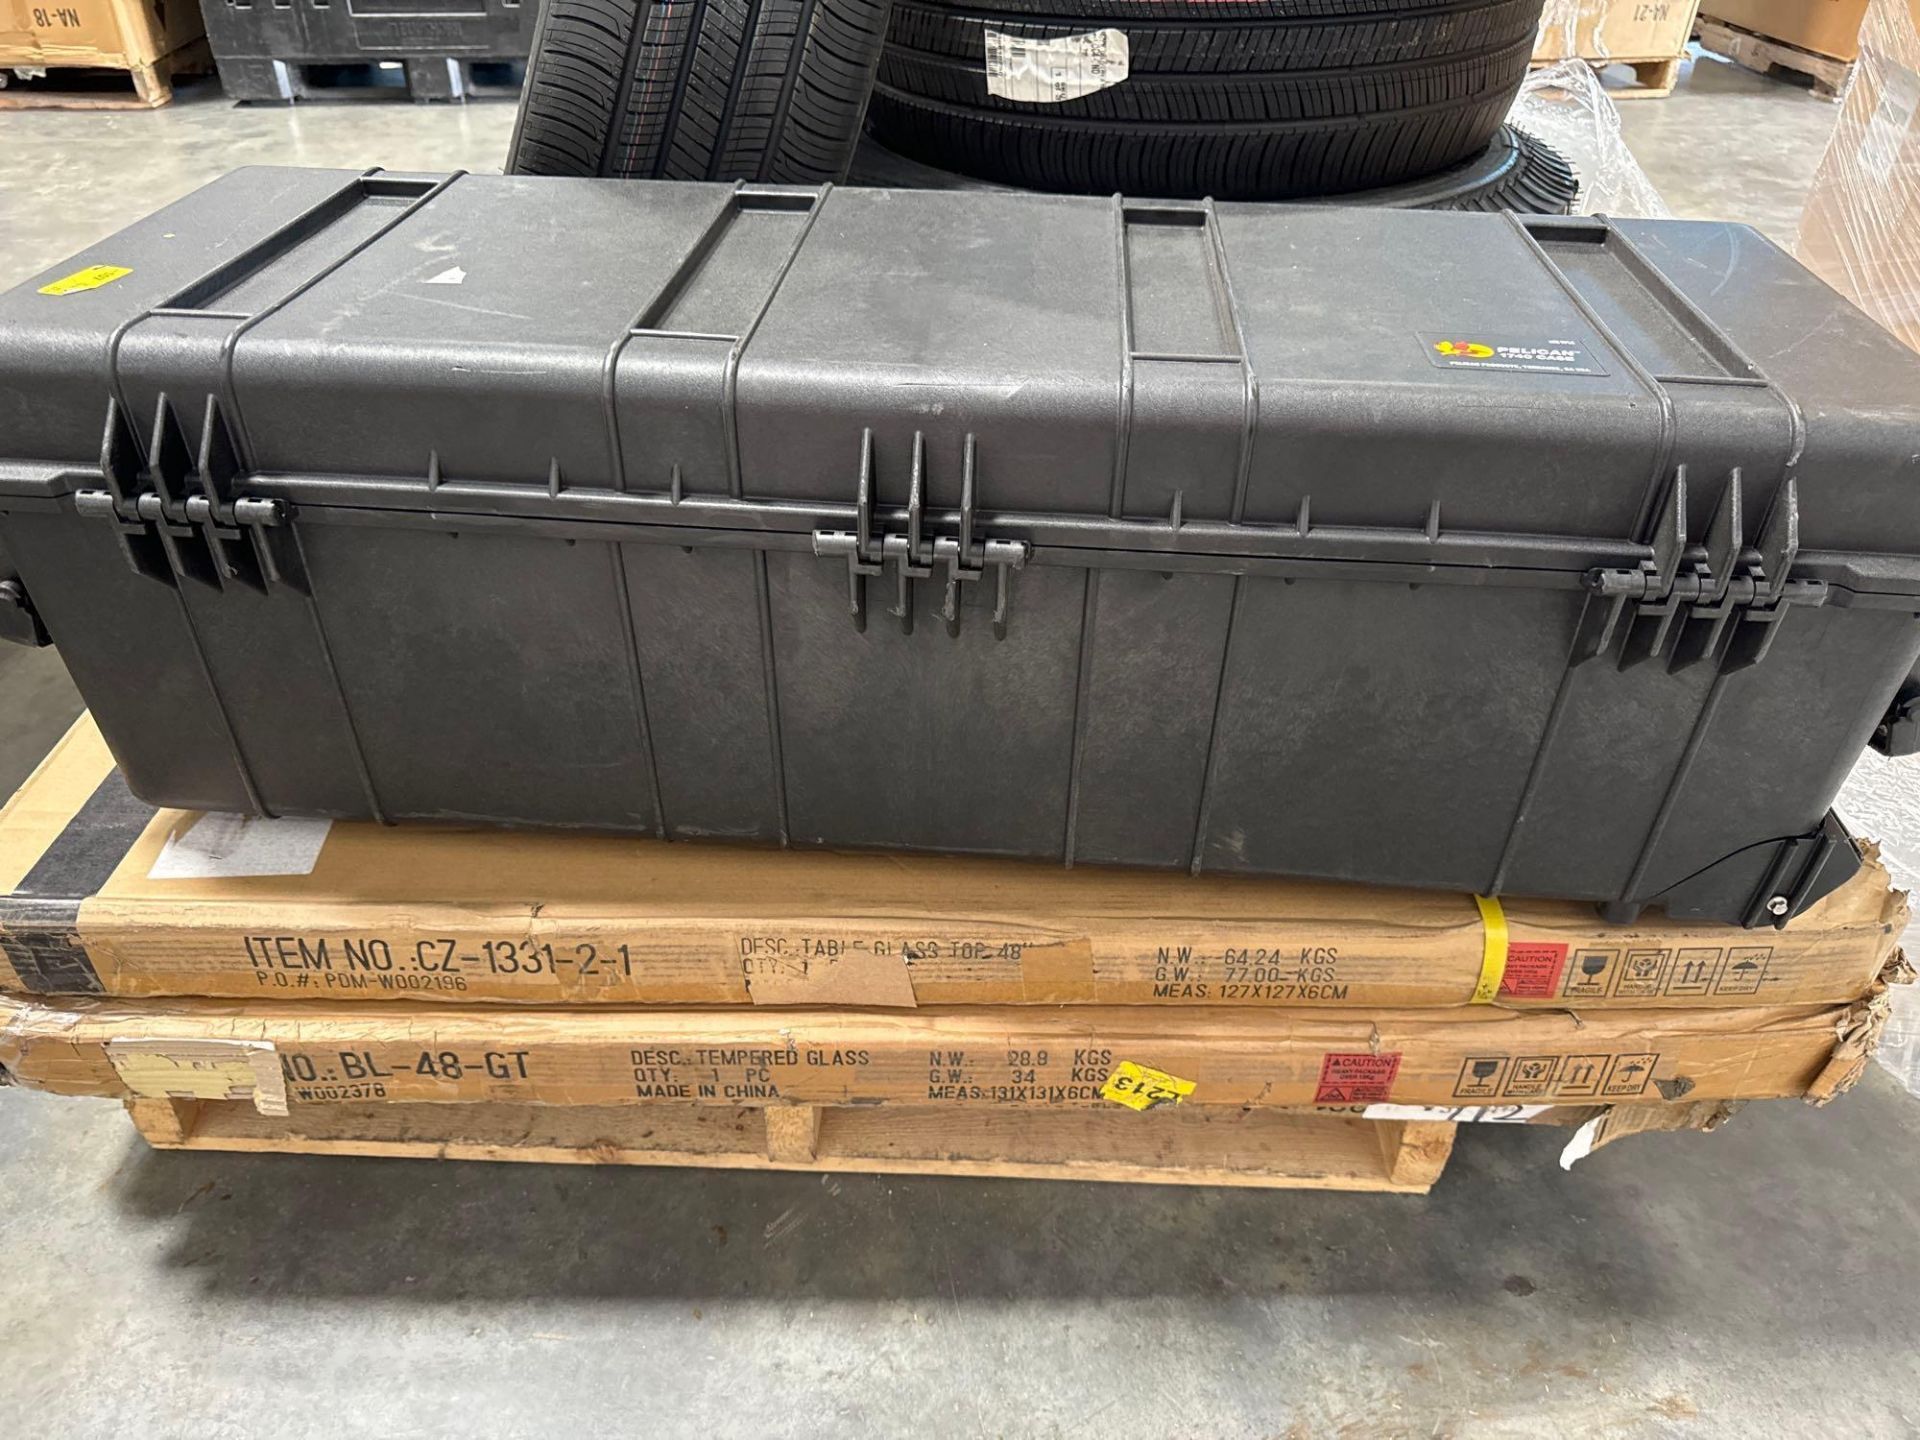 Tires, Pelican 1740 Case, multiple tempered glass tops - Image 6 of 6